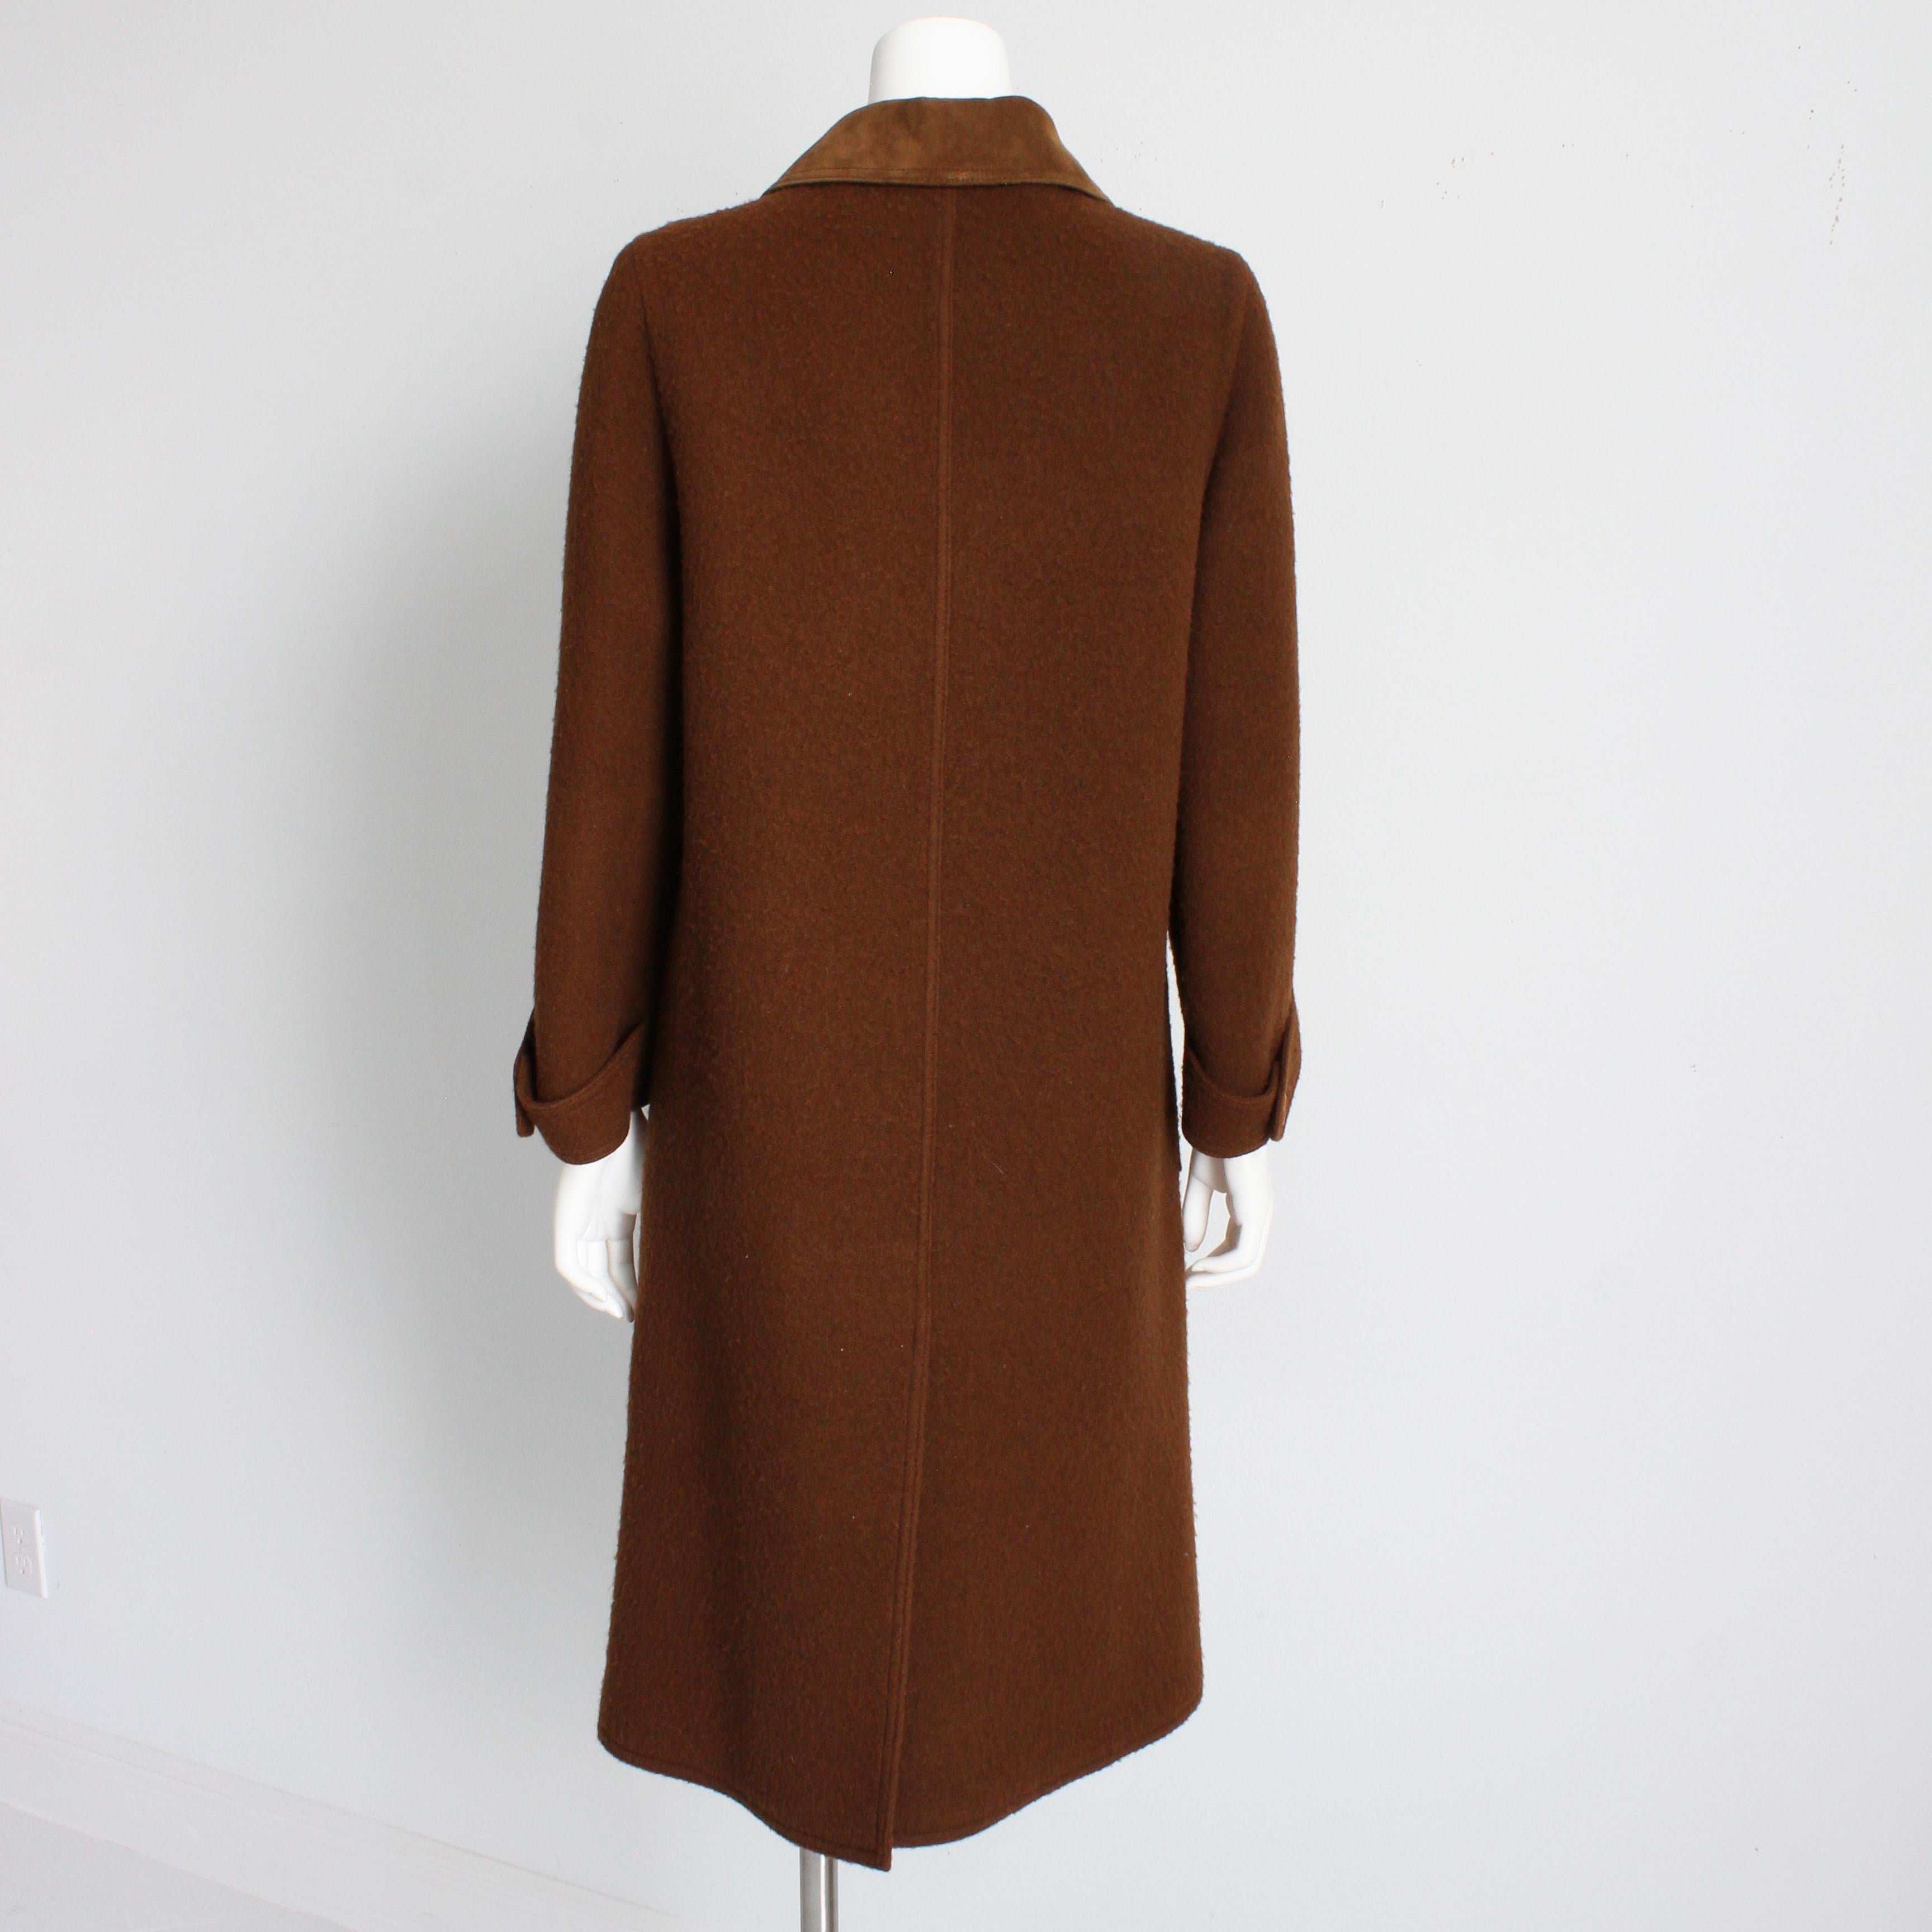 Hermes Brown Double Breasted Suede Leather Trim Trench Style Wool Coat, 1970s For Sale 3